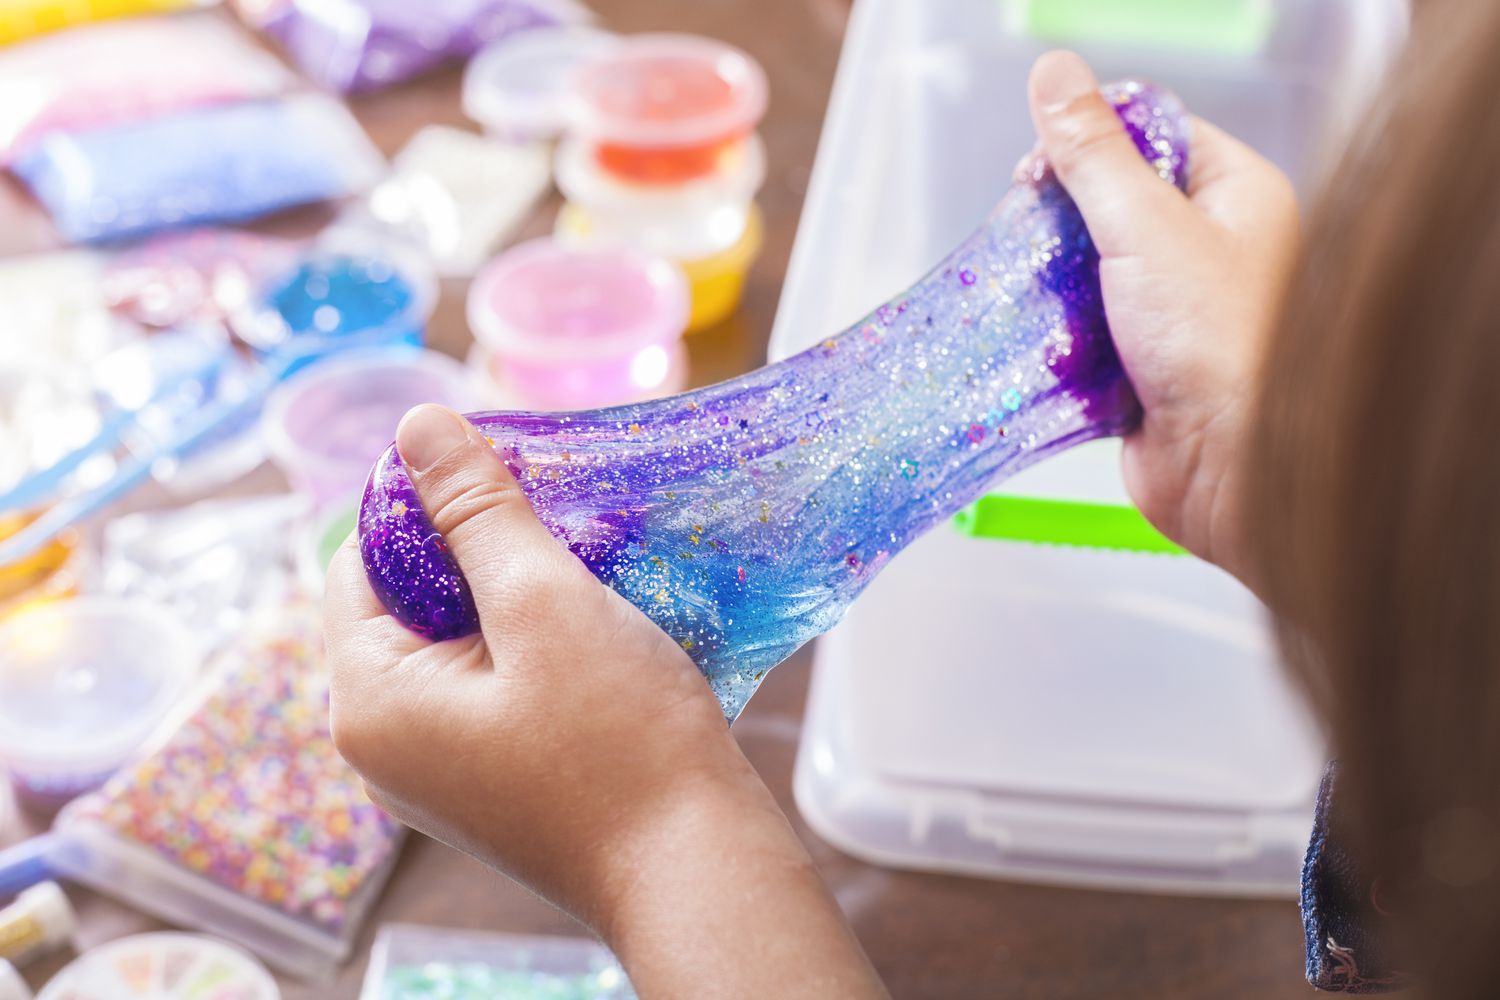 Child playing with glittery purple slime